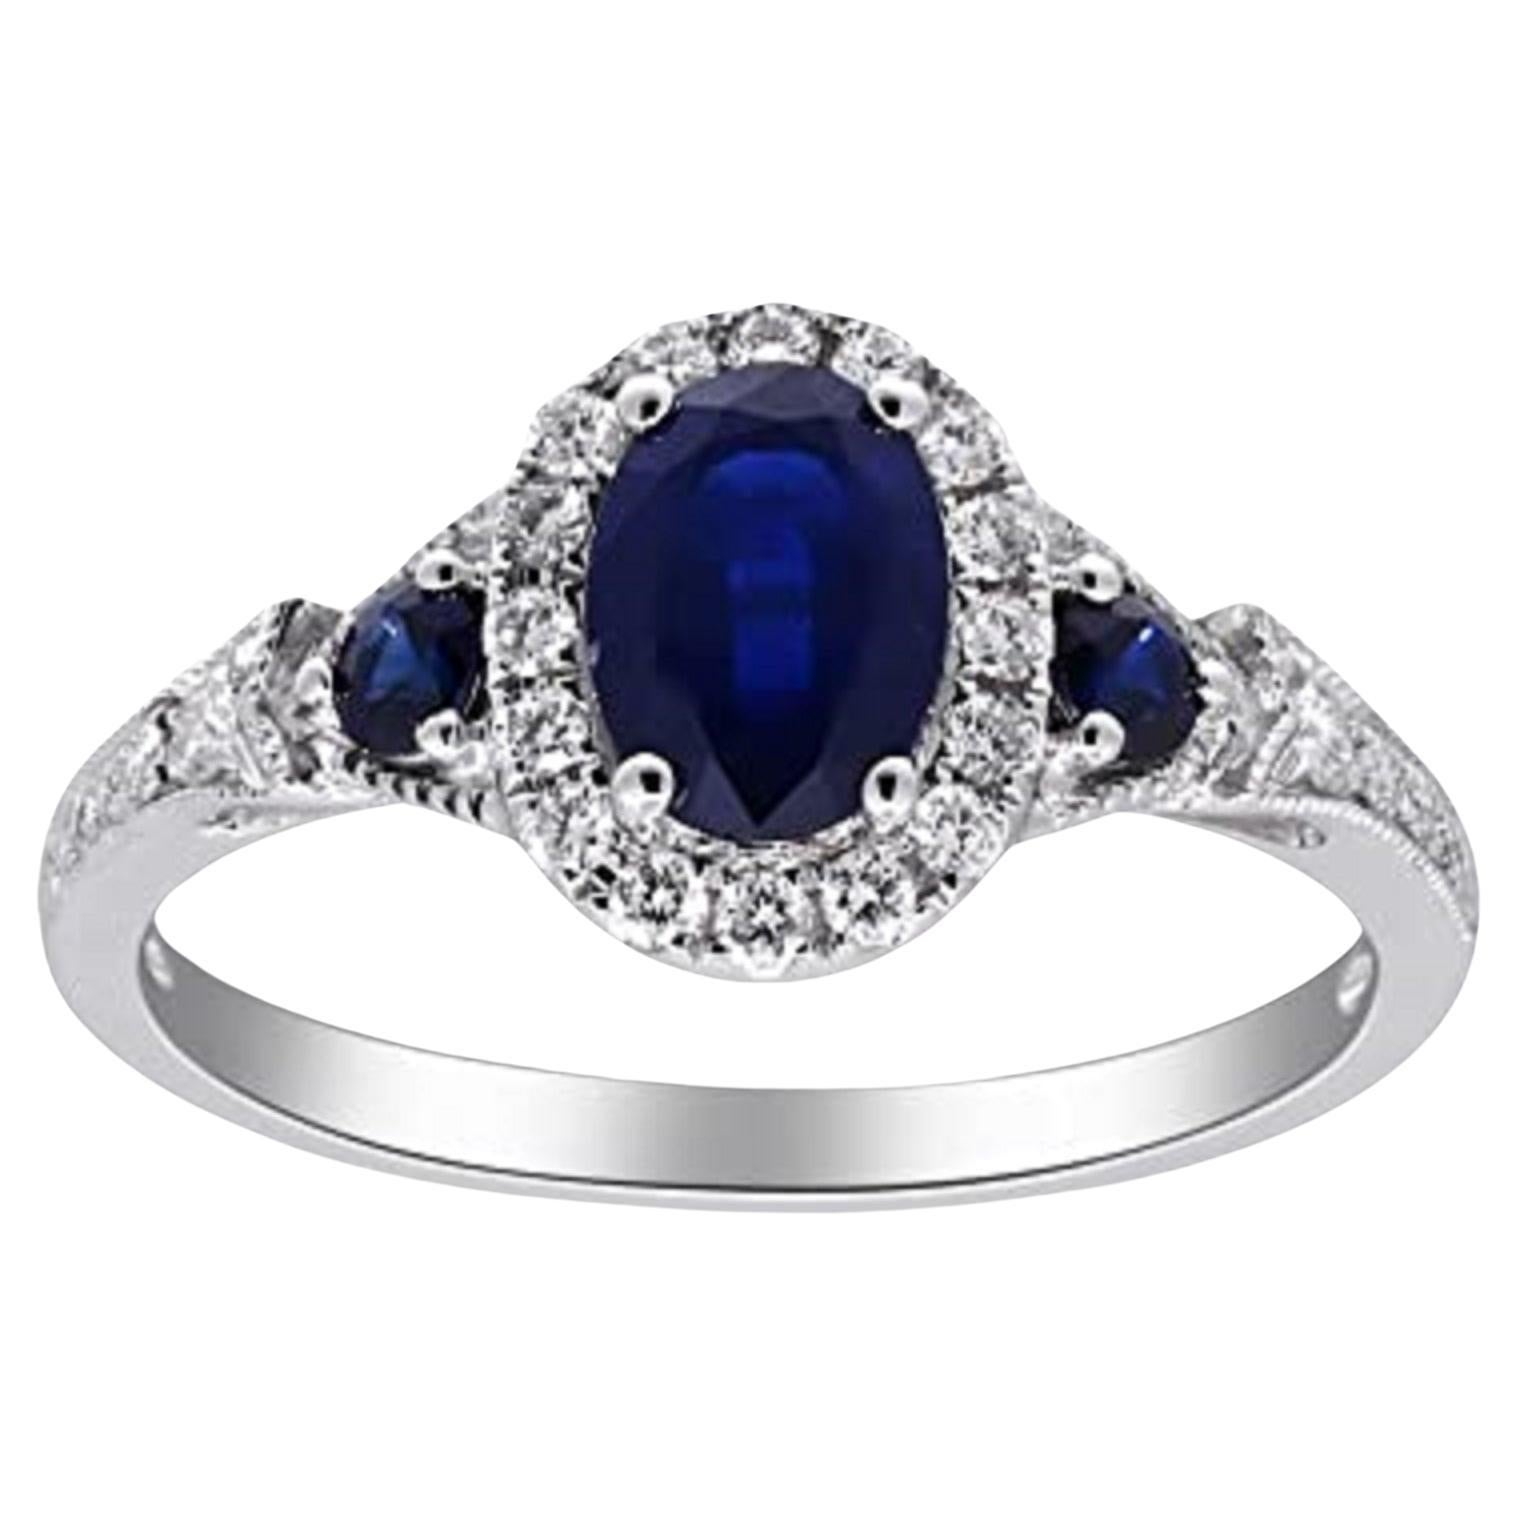  Gin & Grace 14K White Gold Genuine Blue Sapphire Ring with Diamonds for women For Sale